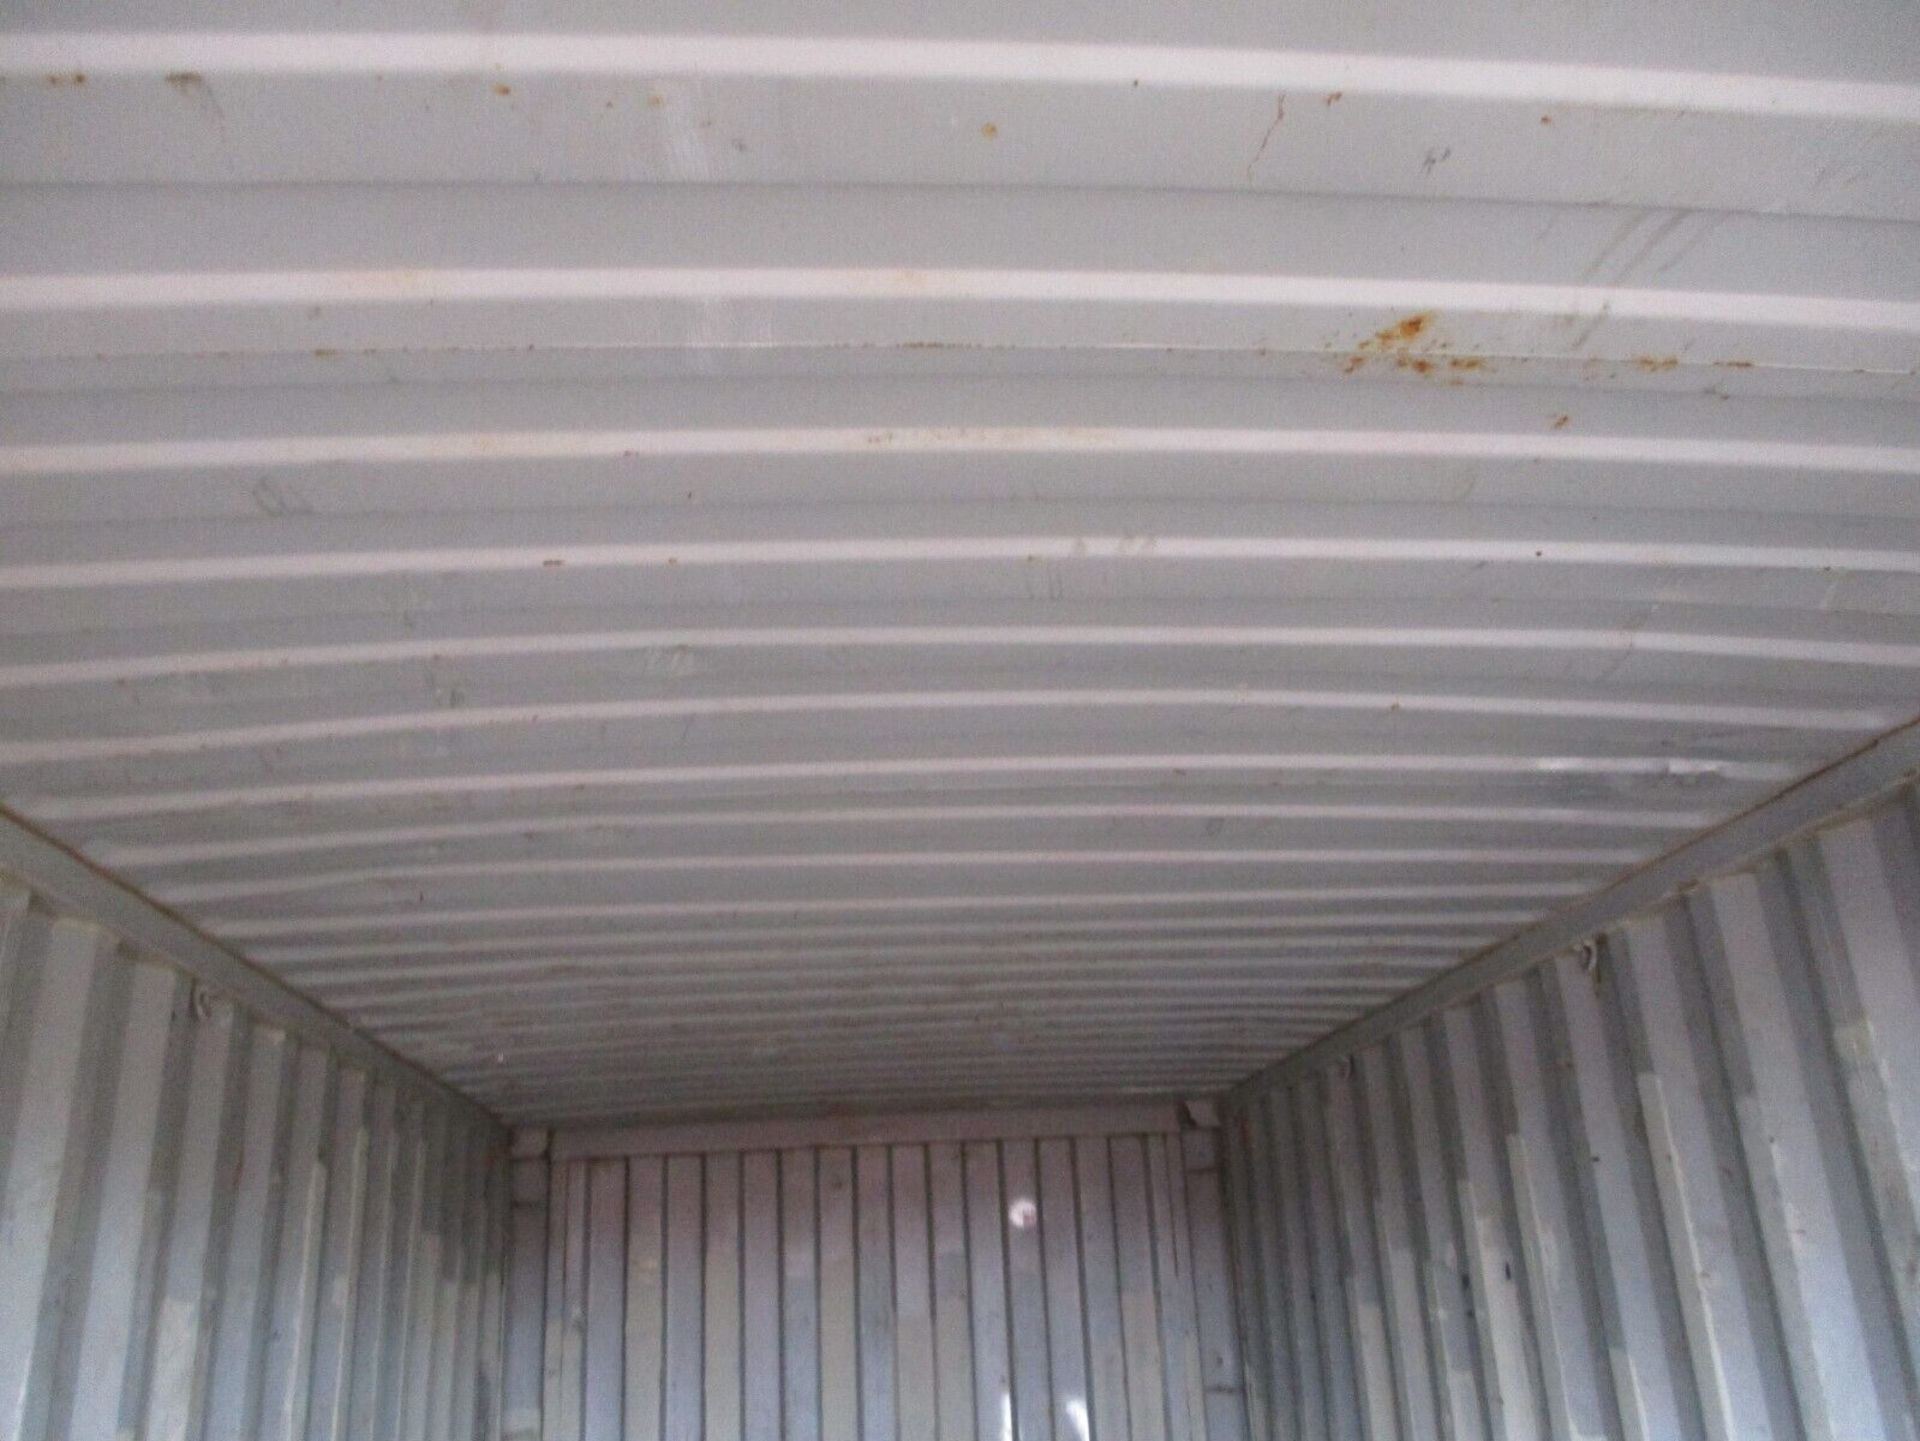 20 FEET LONG X 8 FEET WIDE SHIPPING CONTAINER - Image 11 of 13